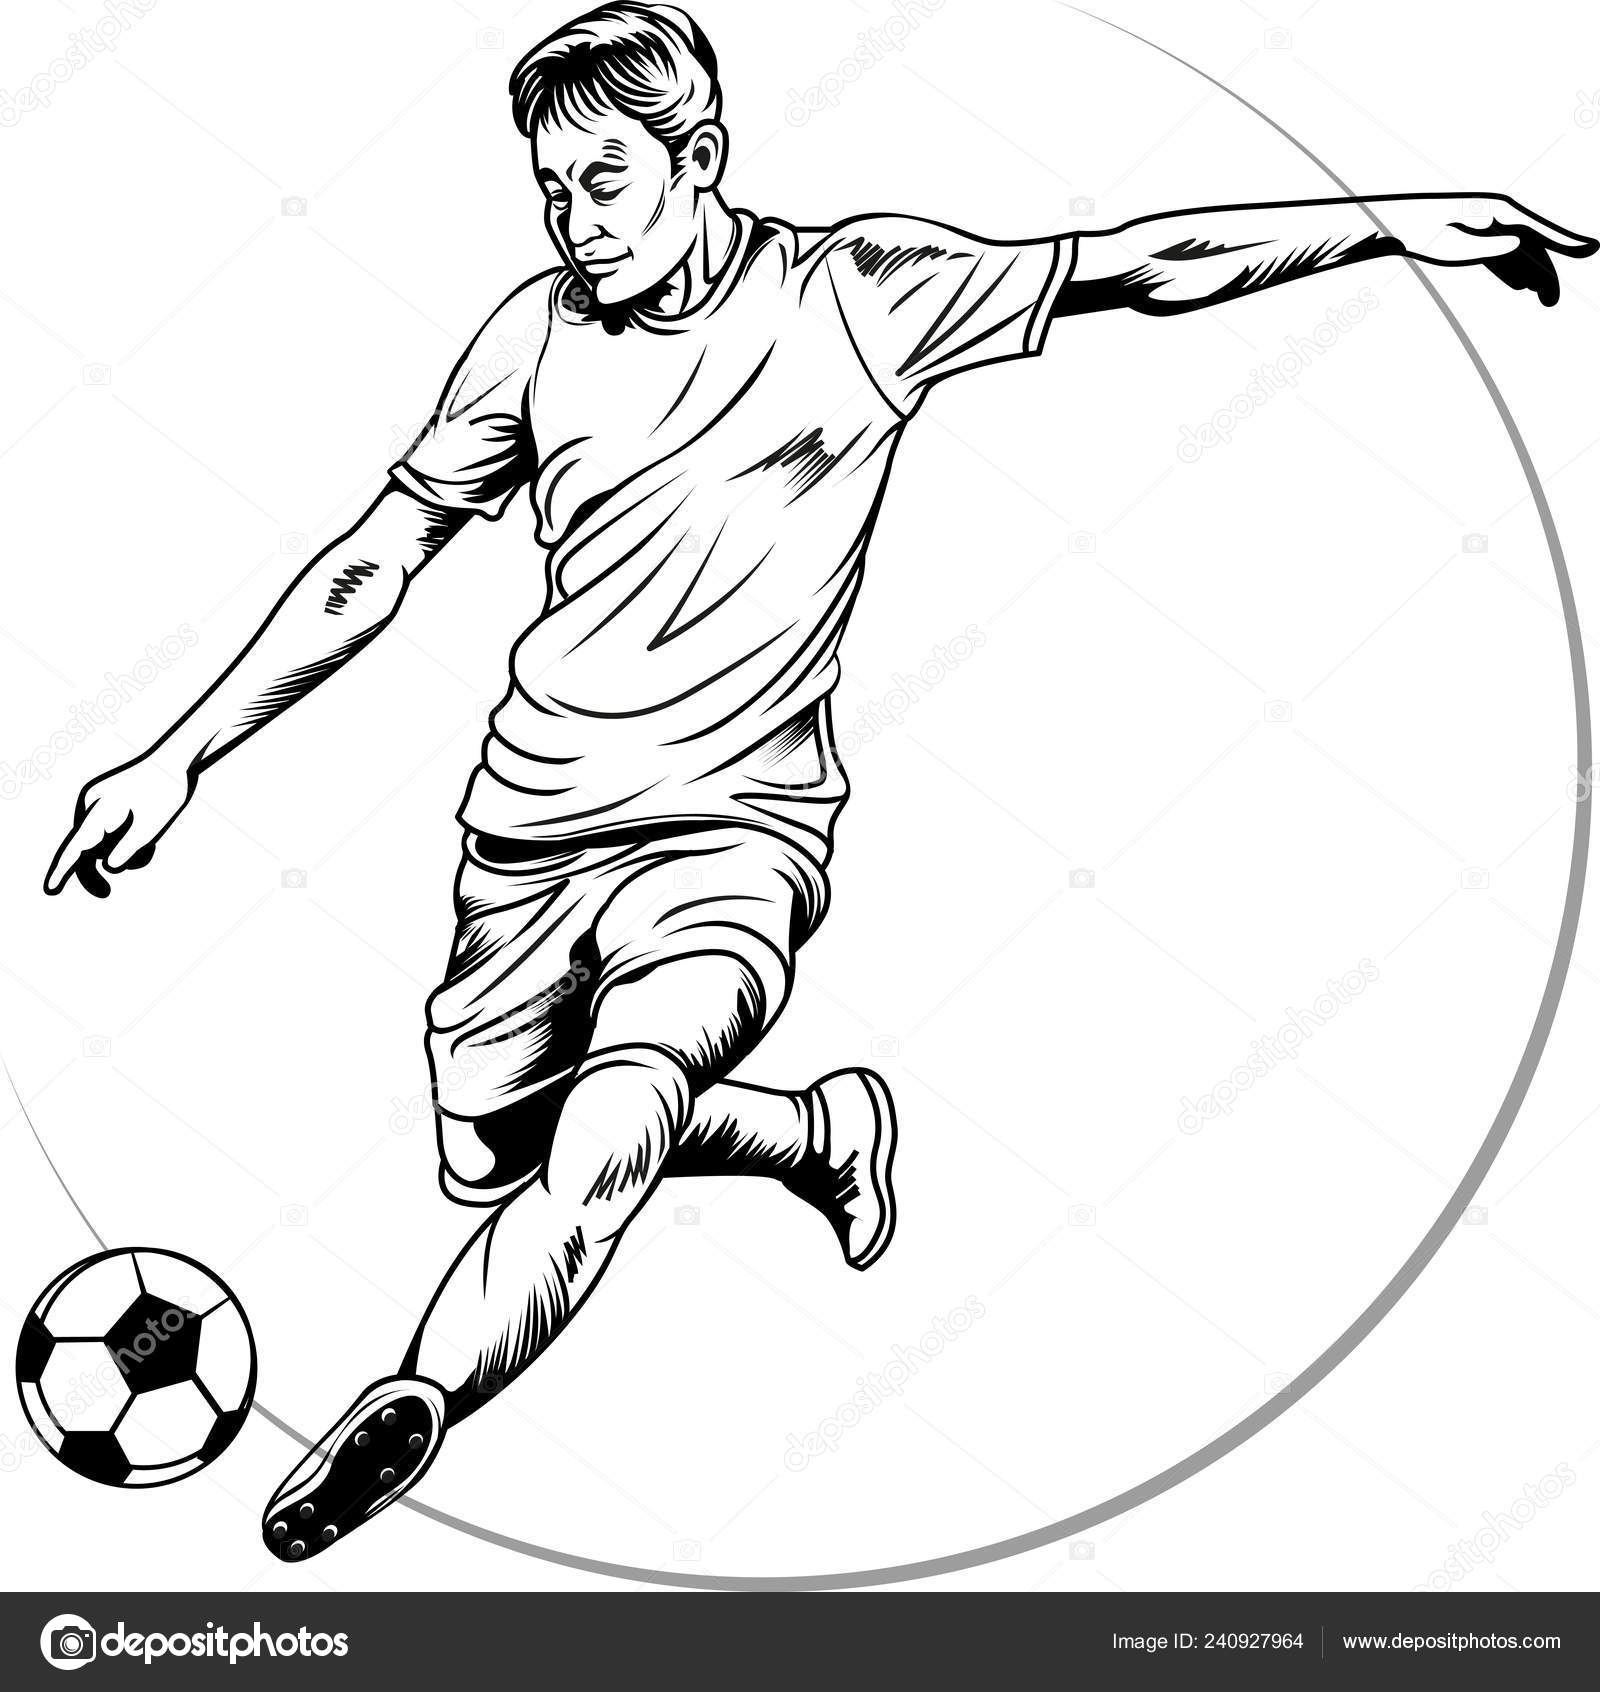 Sketch the guy plays football The guy plays football scanned sketch in  pencil  CanStock